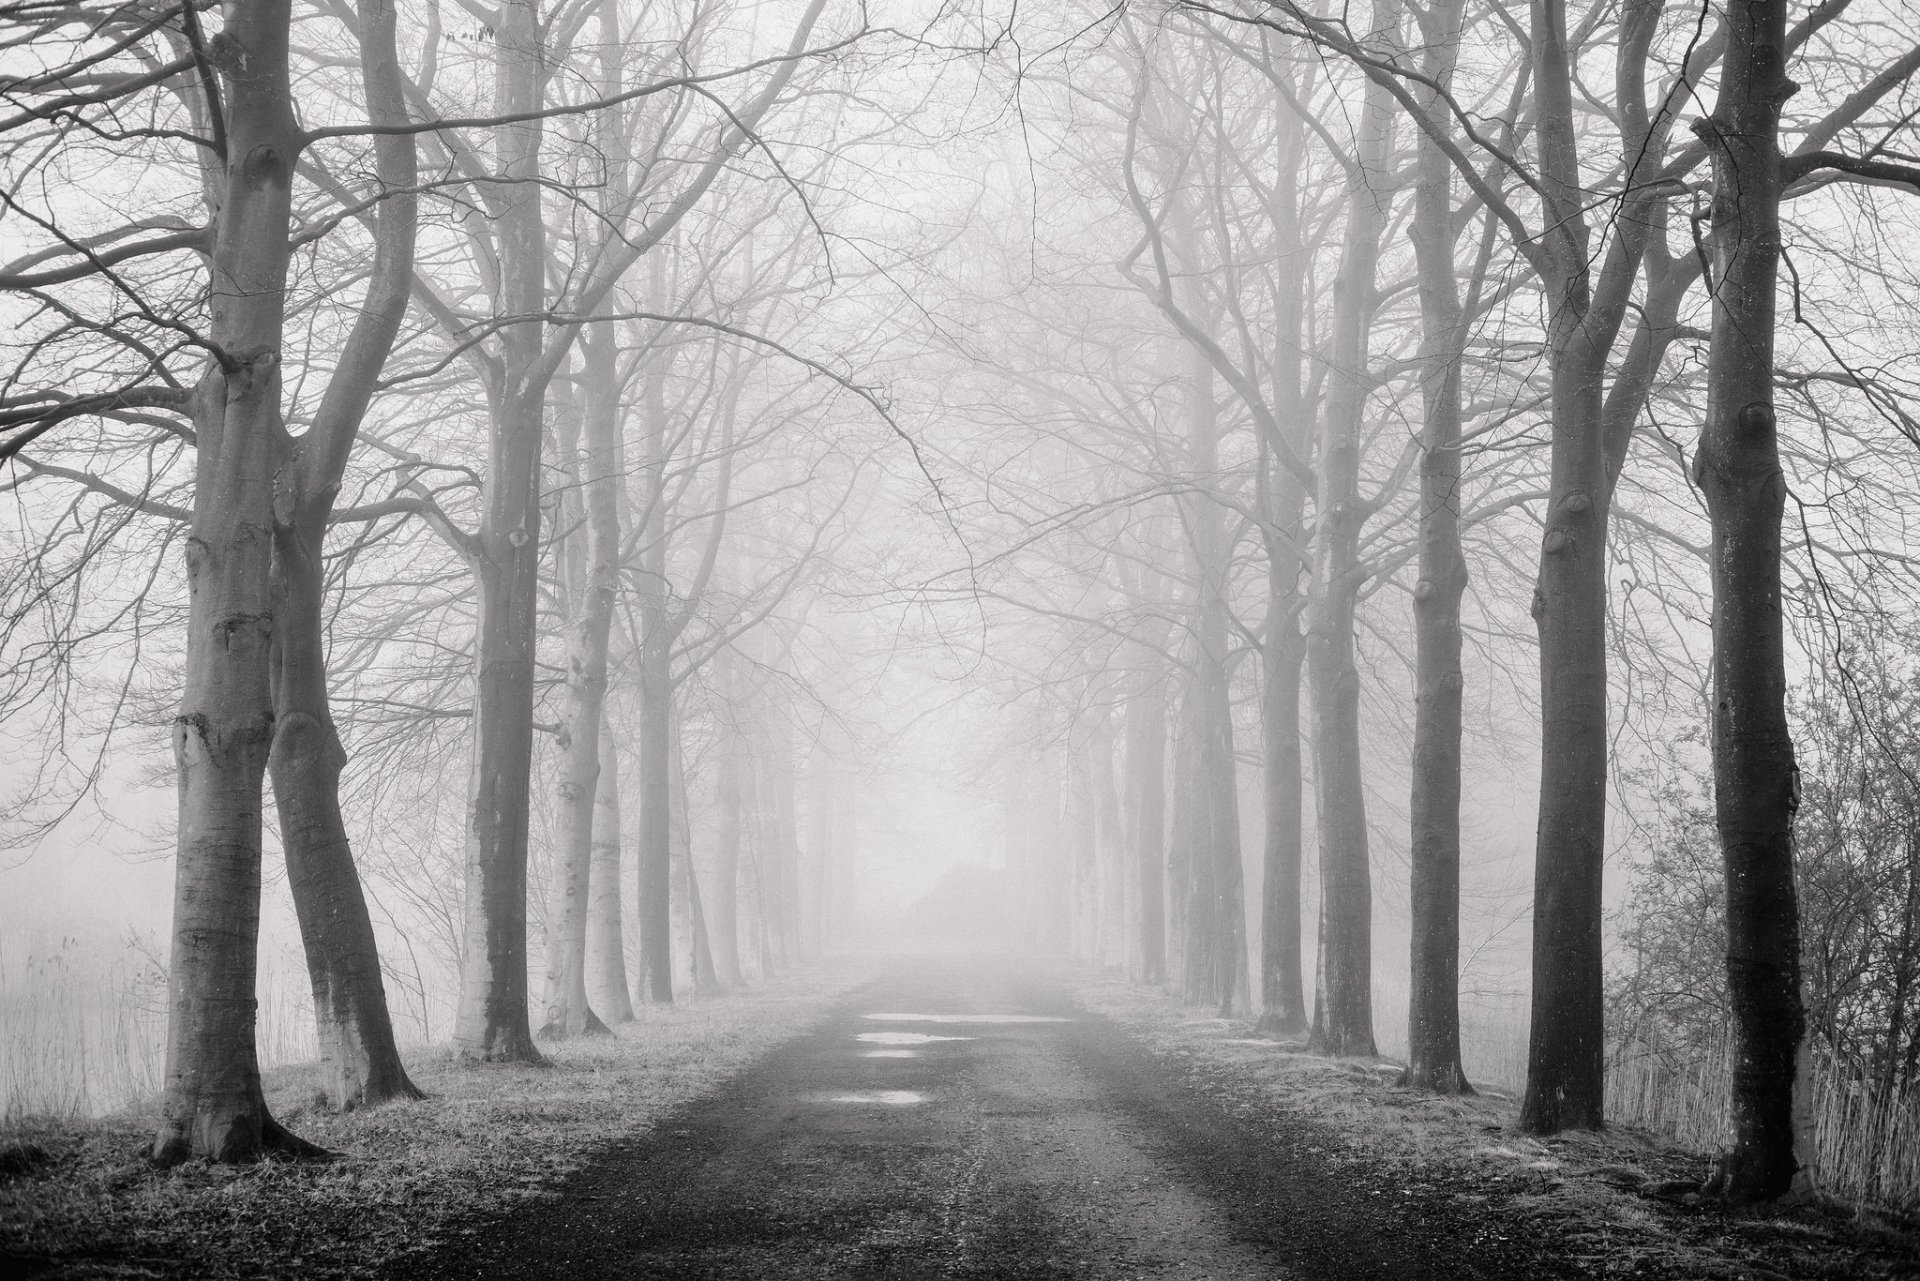 Download Monochrome Fog Tree-lined Tree Nature Man Made Road HD Wallpaper